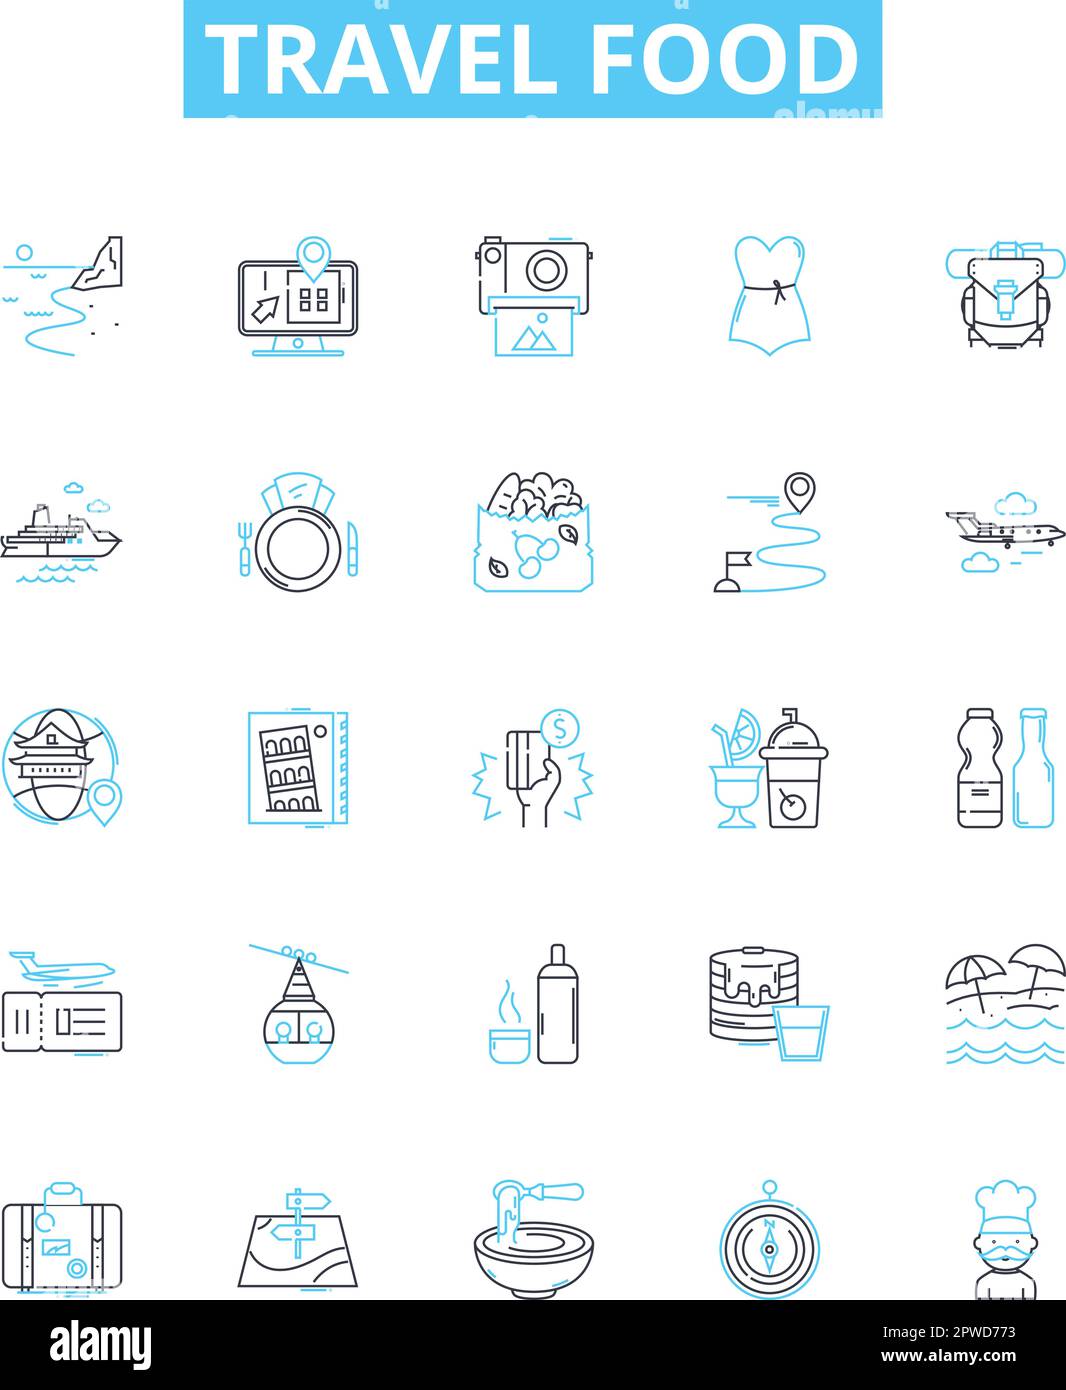 Travel food vector line icons set. Voyage, Cuisine, Meal, Taste, Delicacy, Snack, Portable illustration outline concept symbols and signs Stock Vector